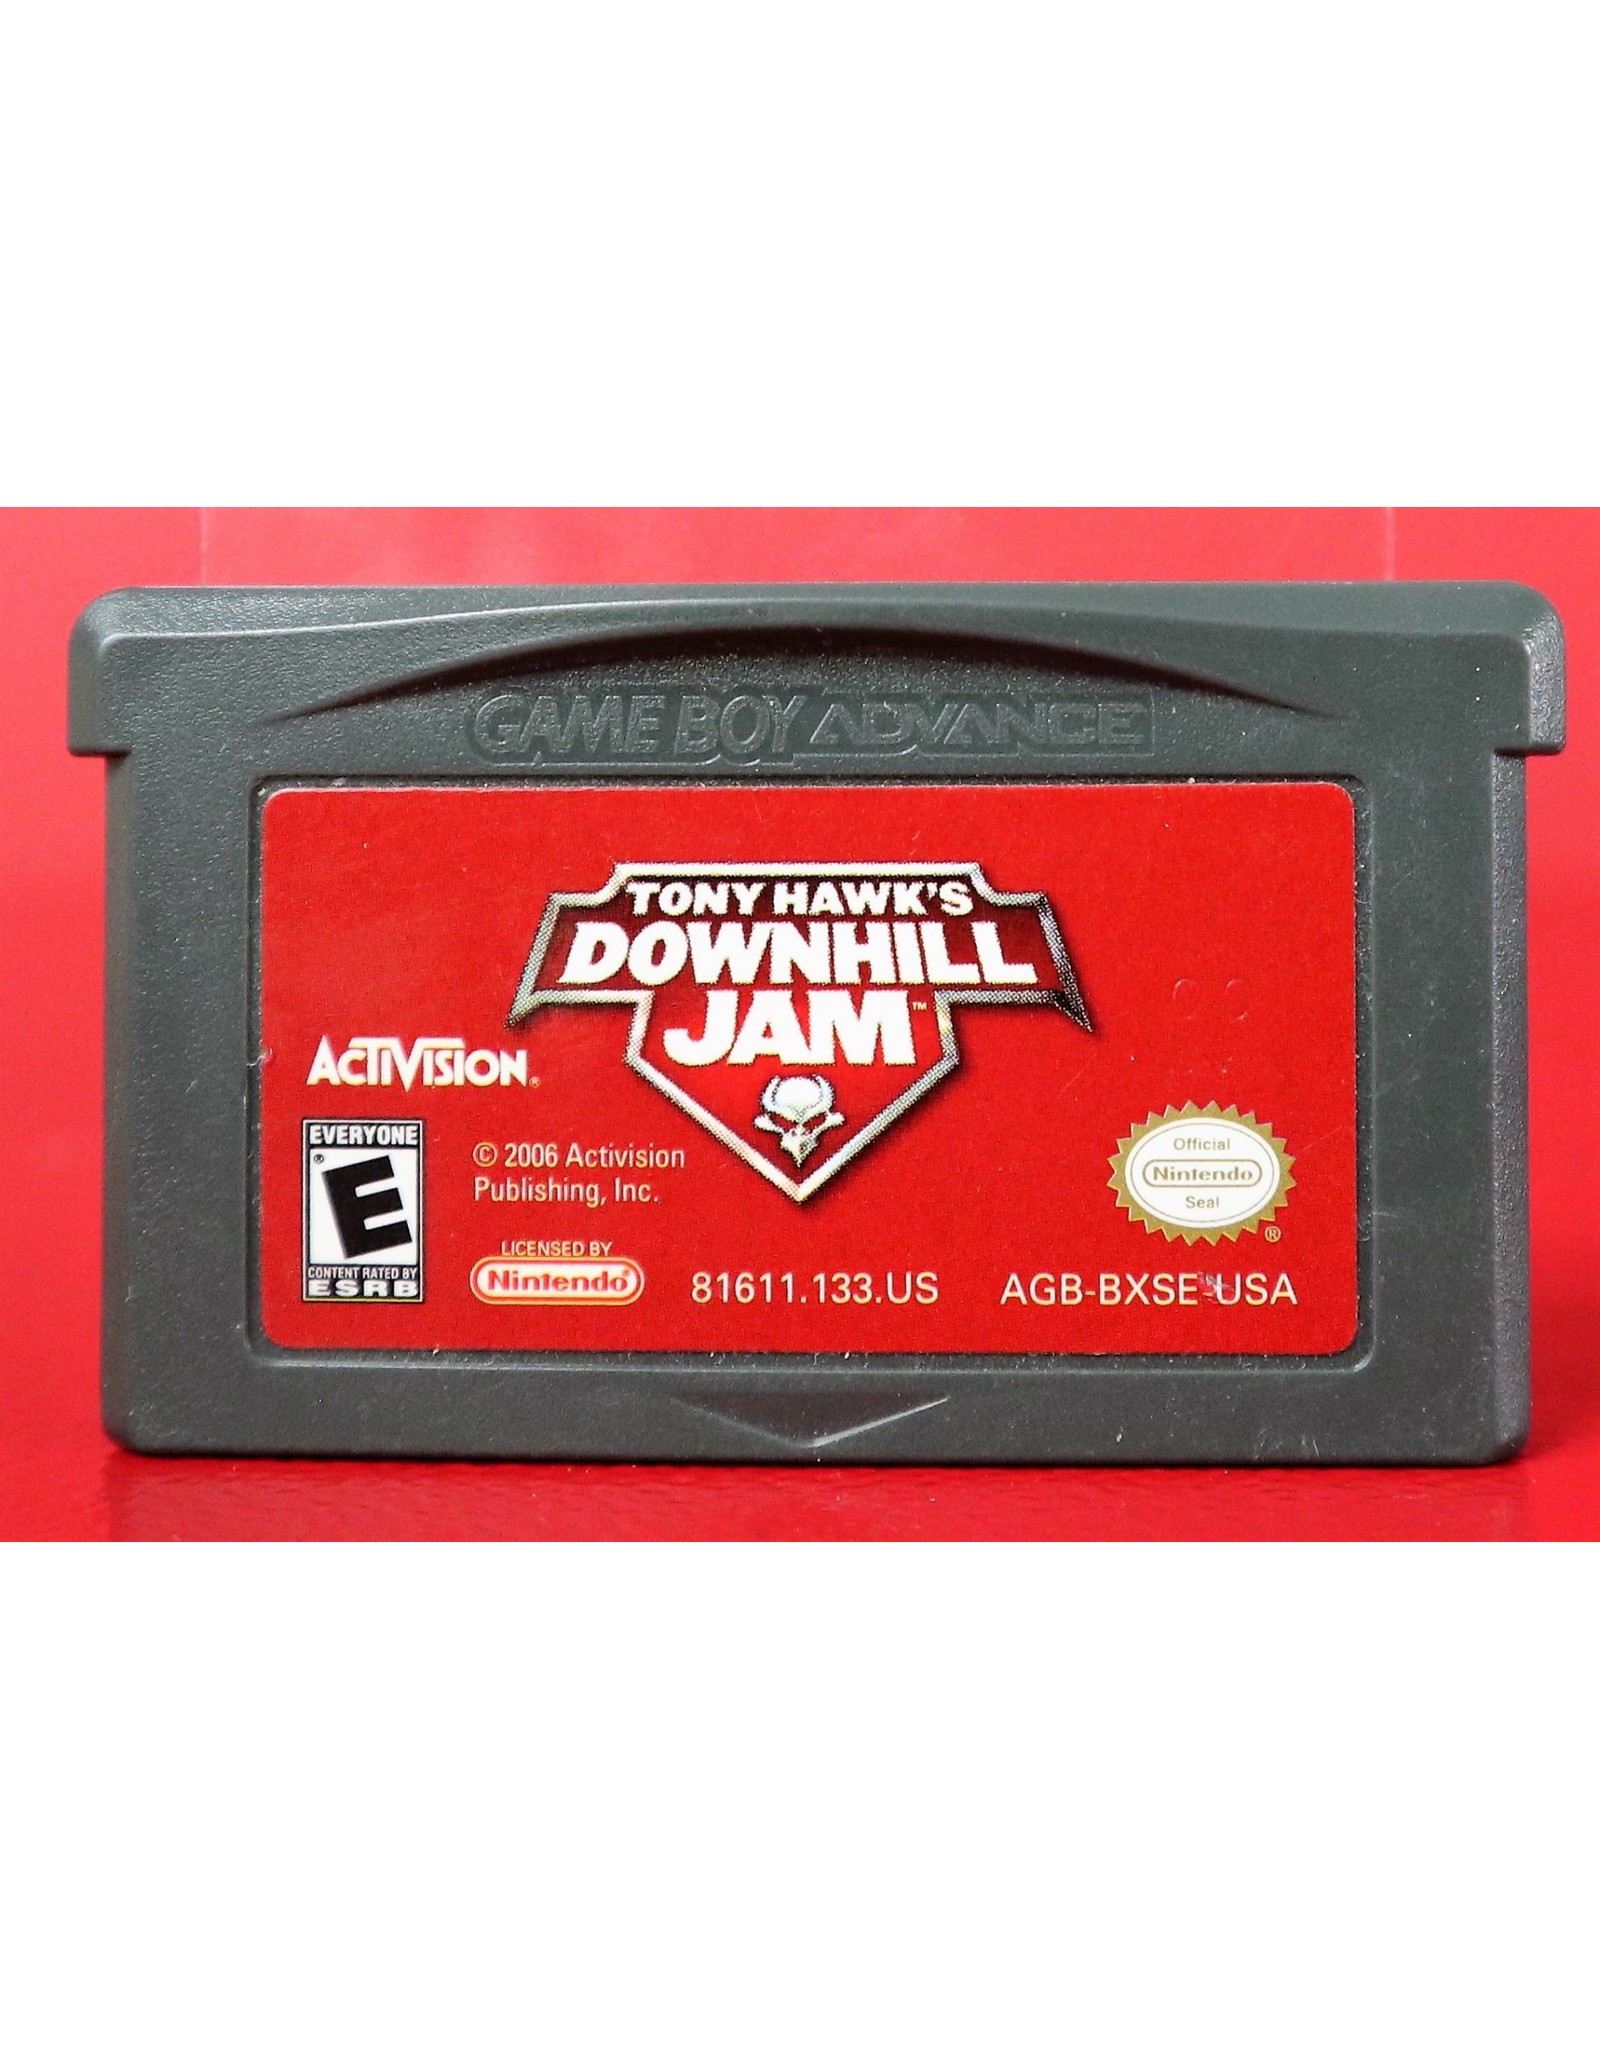 Used Game - Game Boy Advance - Tony Hawk's Downhill Jam [Cart Only]